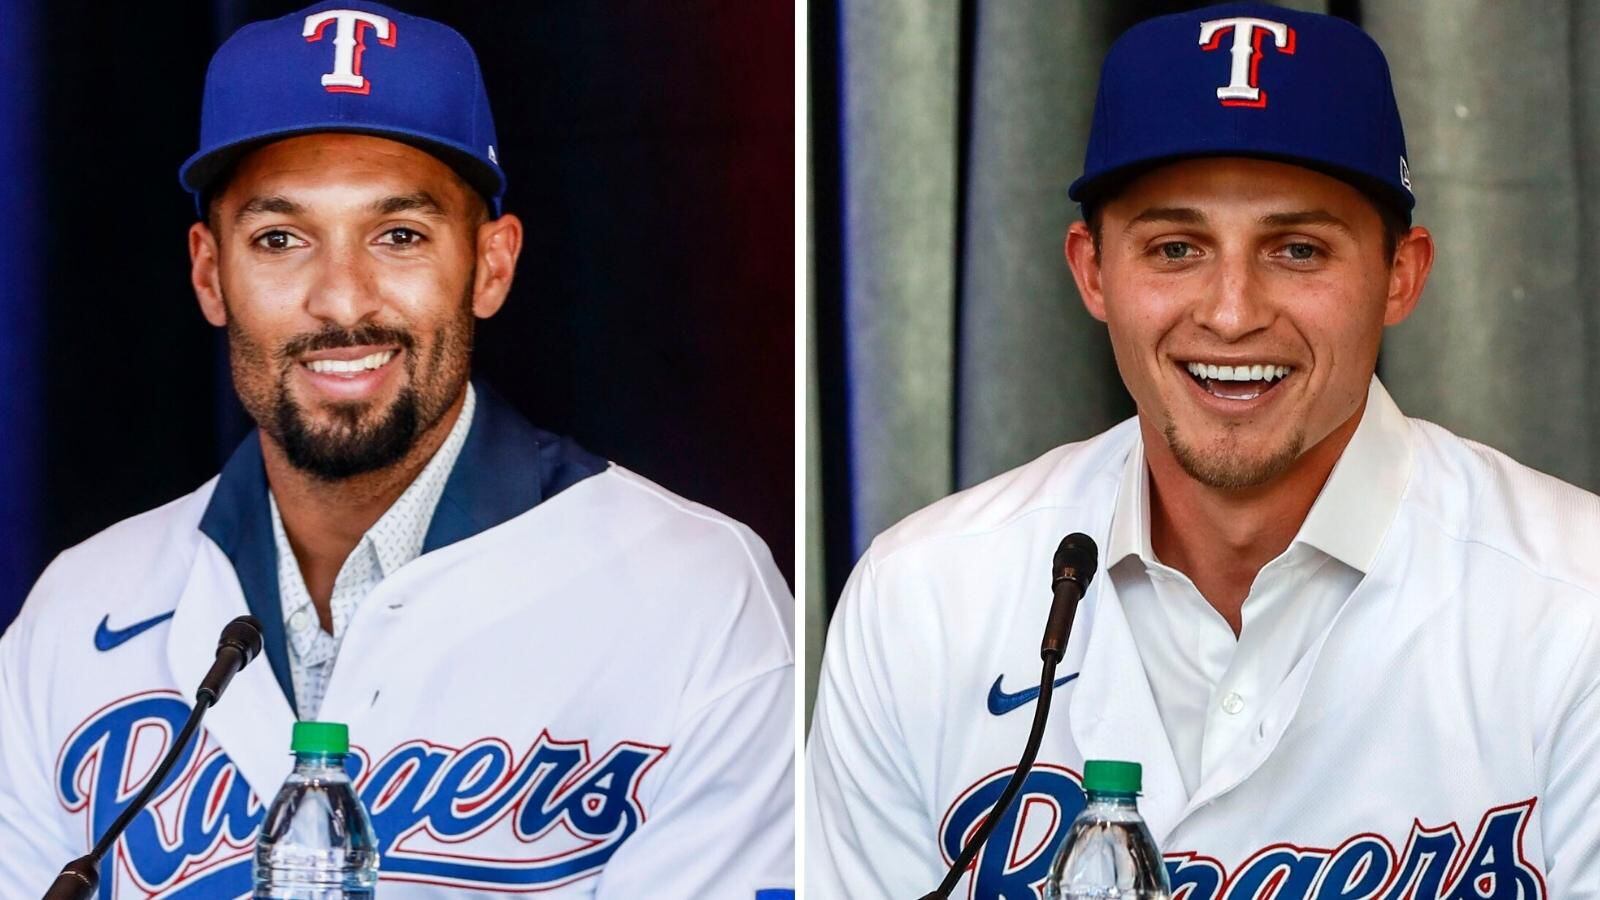 On Wednesday the Rangers introduced Marcus Semien (left) and Corey Seager (right), the newest members of the club who accounted for $500 million of the Rangers’ MLB-record $561 million free agent spending spree.